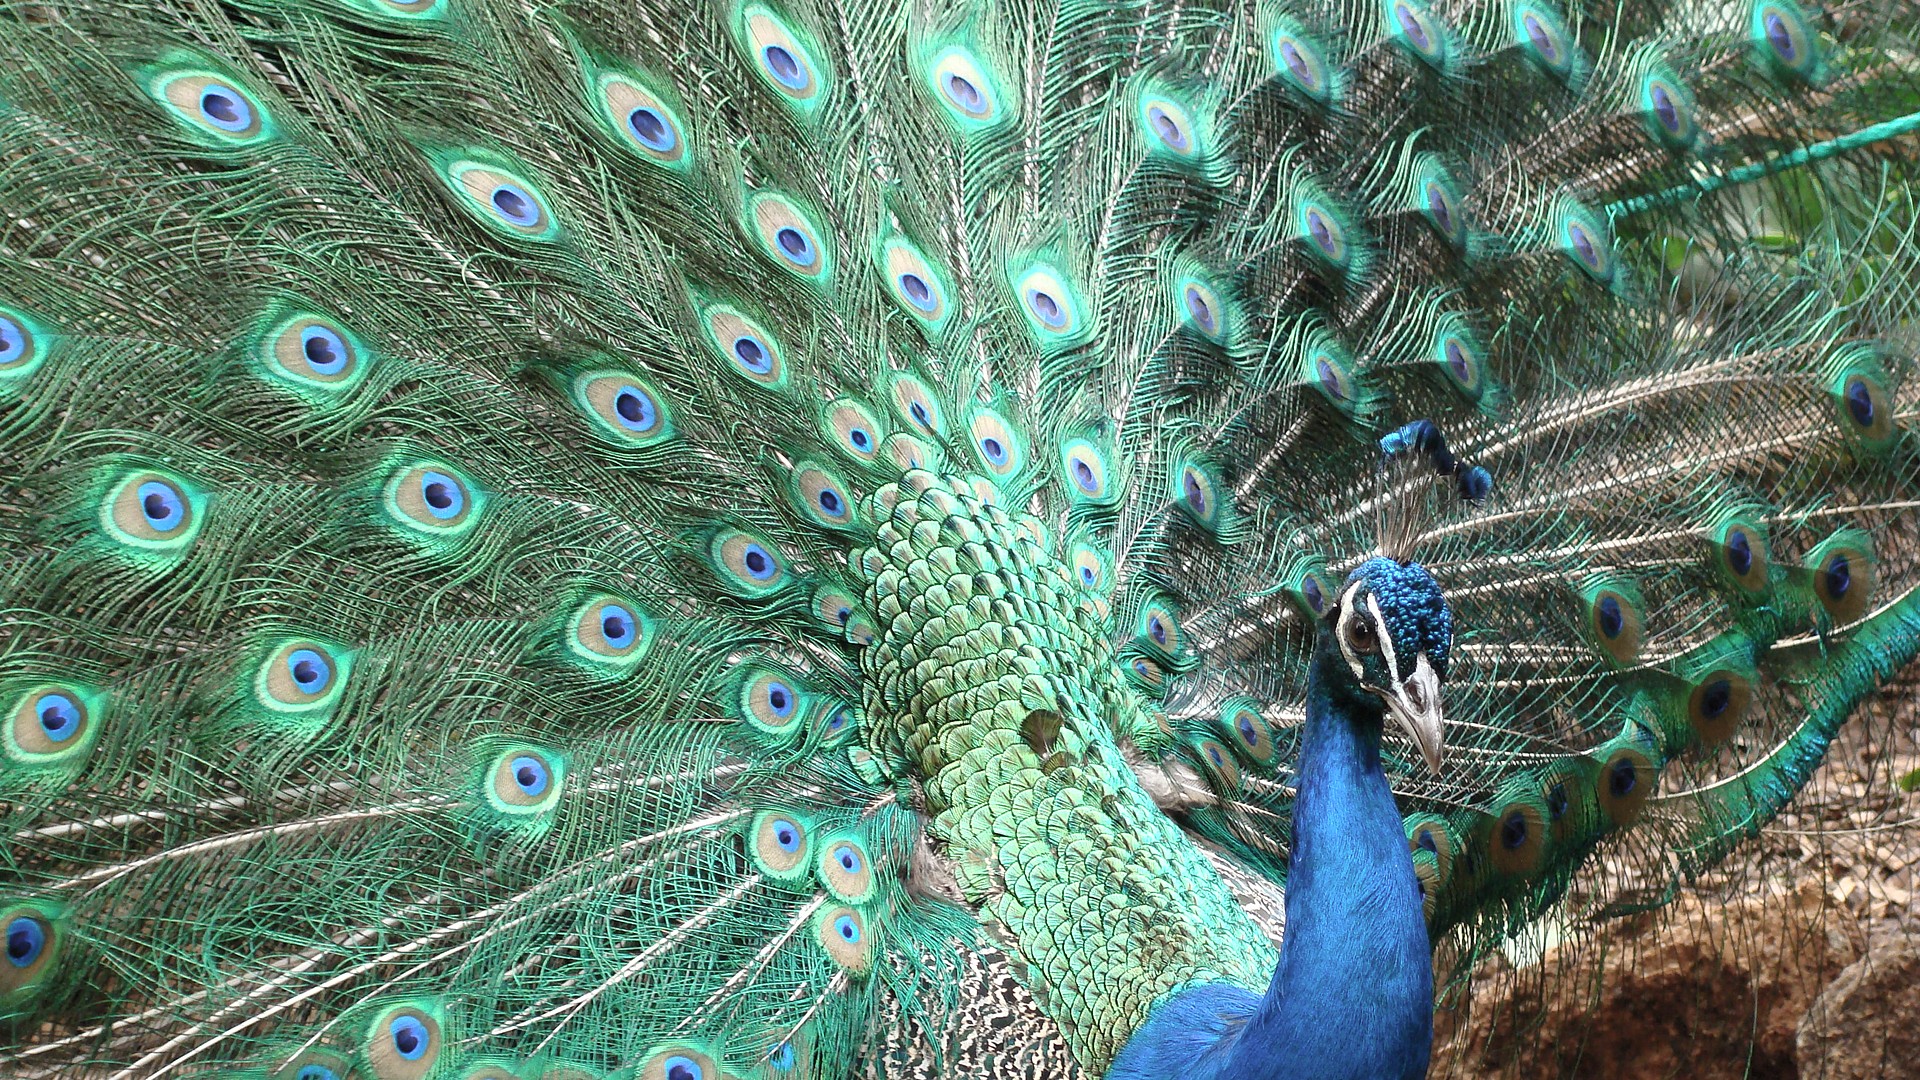 General 1920x1080 animals nature peacocks birds feathers